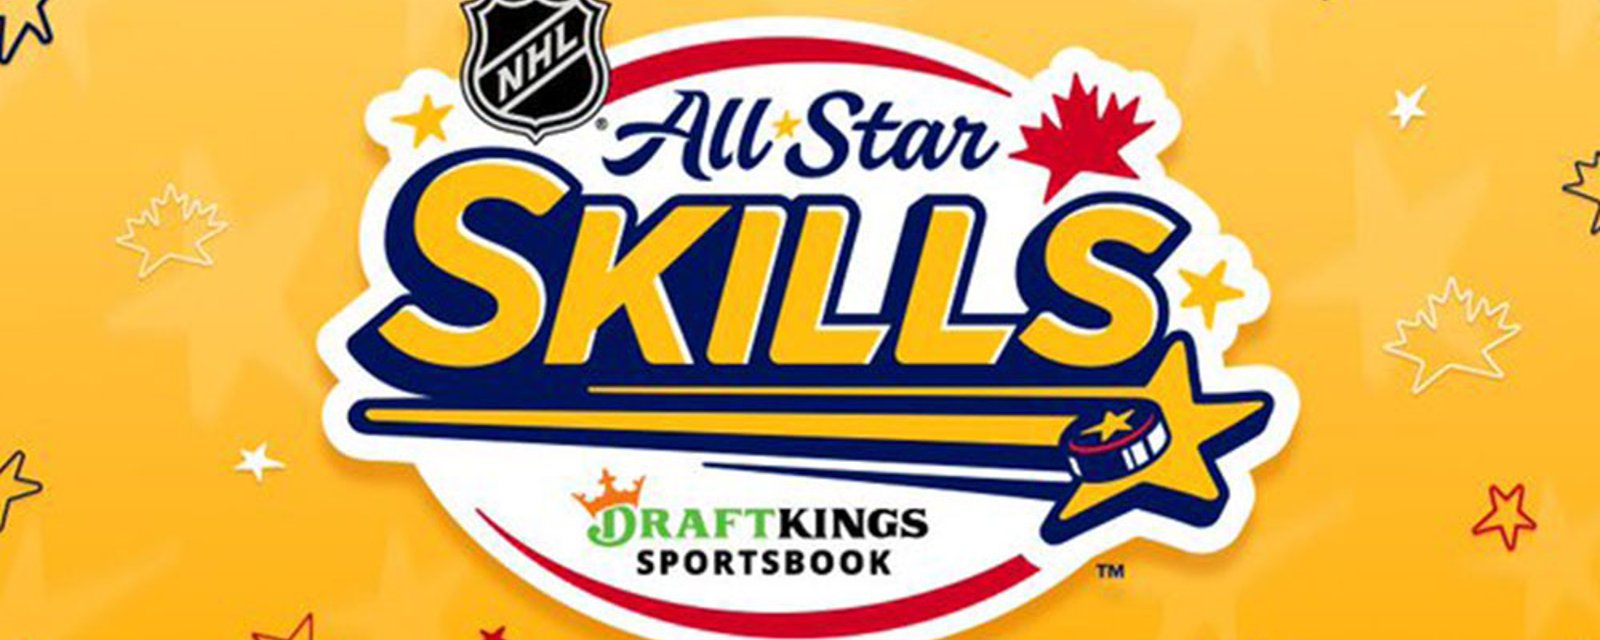 NHL announces all new All-Star Skills Competition with a $1 million winner take all prize